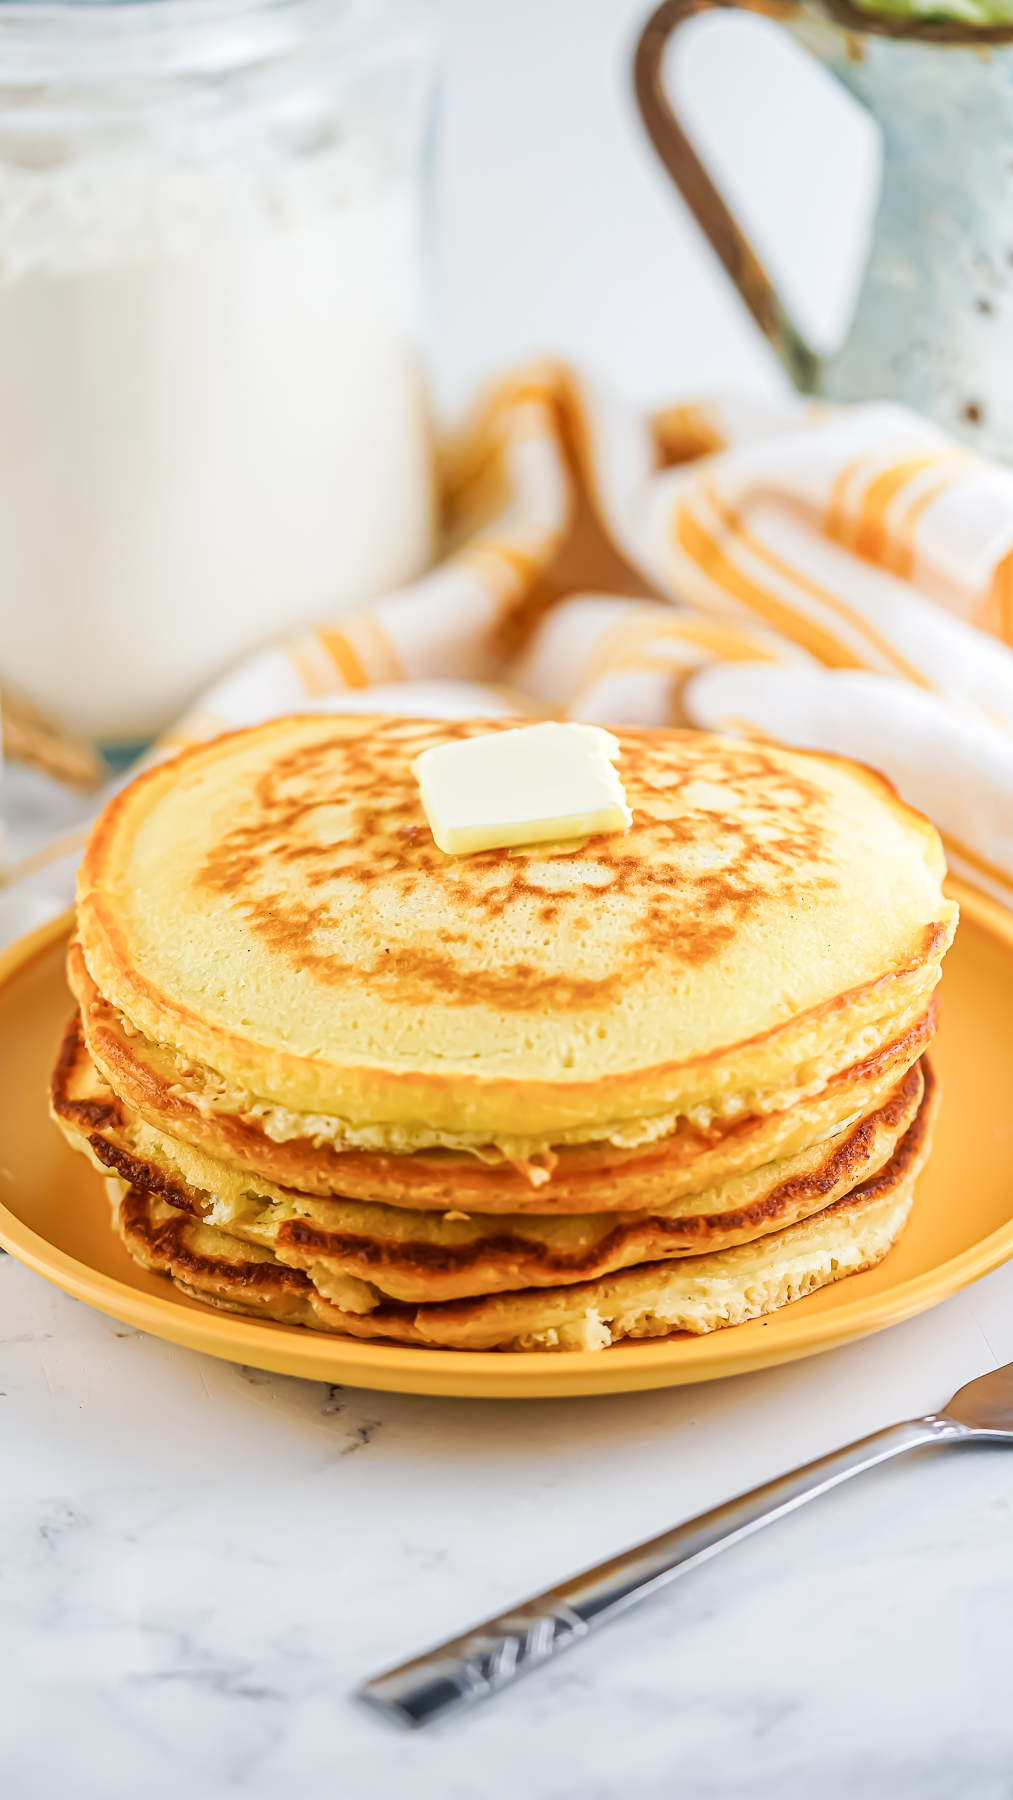 A stack of golden brown pancakes made by using the homemade bulk pancake mix recipe.